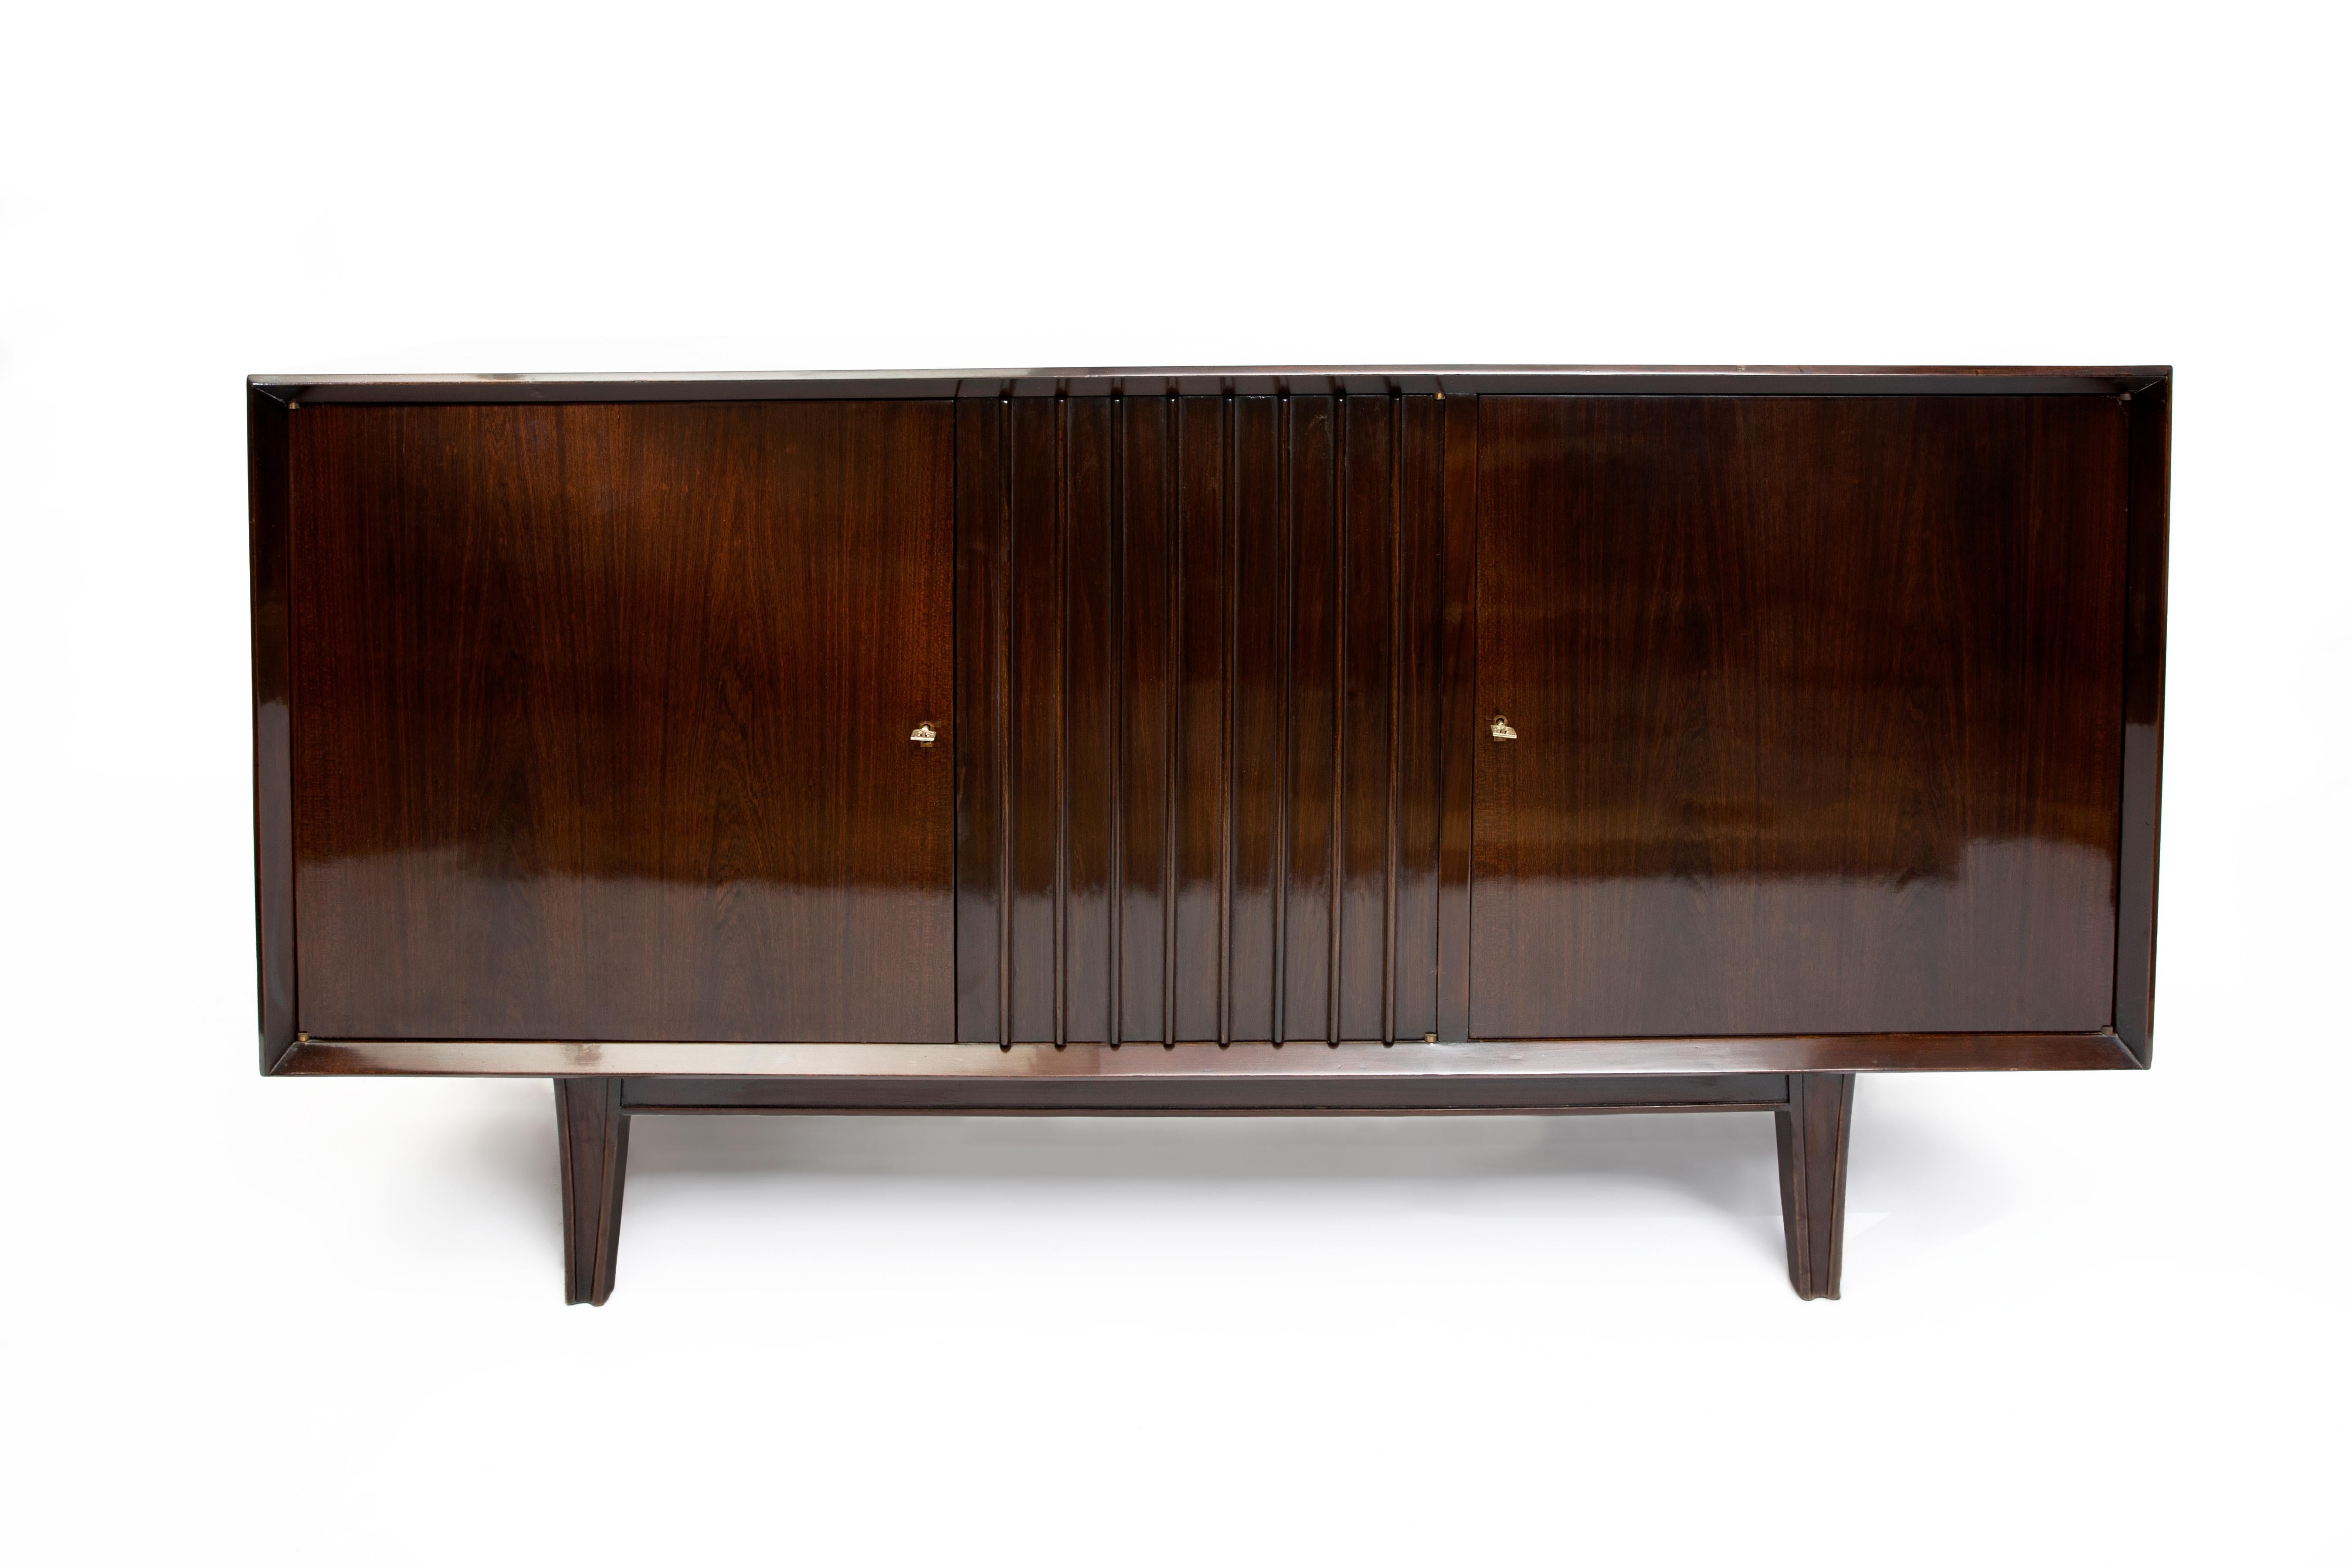 Argentine Wood, Glass and Bronze Cabinet and Vitrine by Englander & Bonta, Argentina, 1950 For Sale